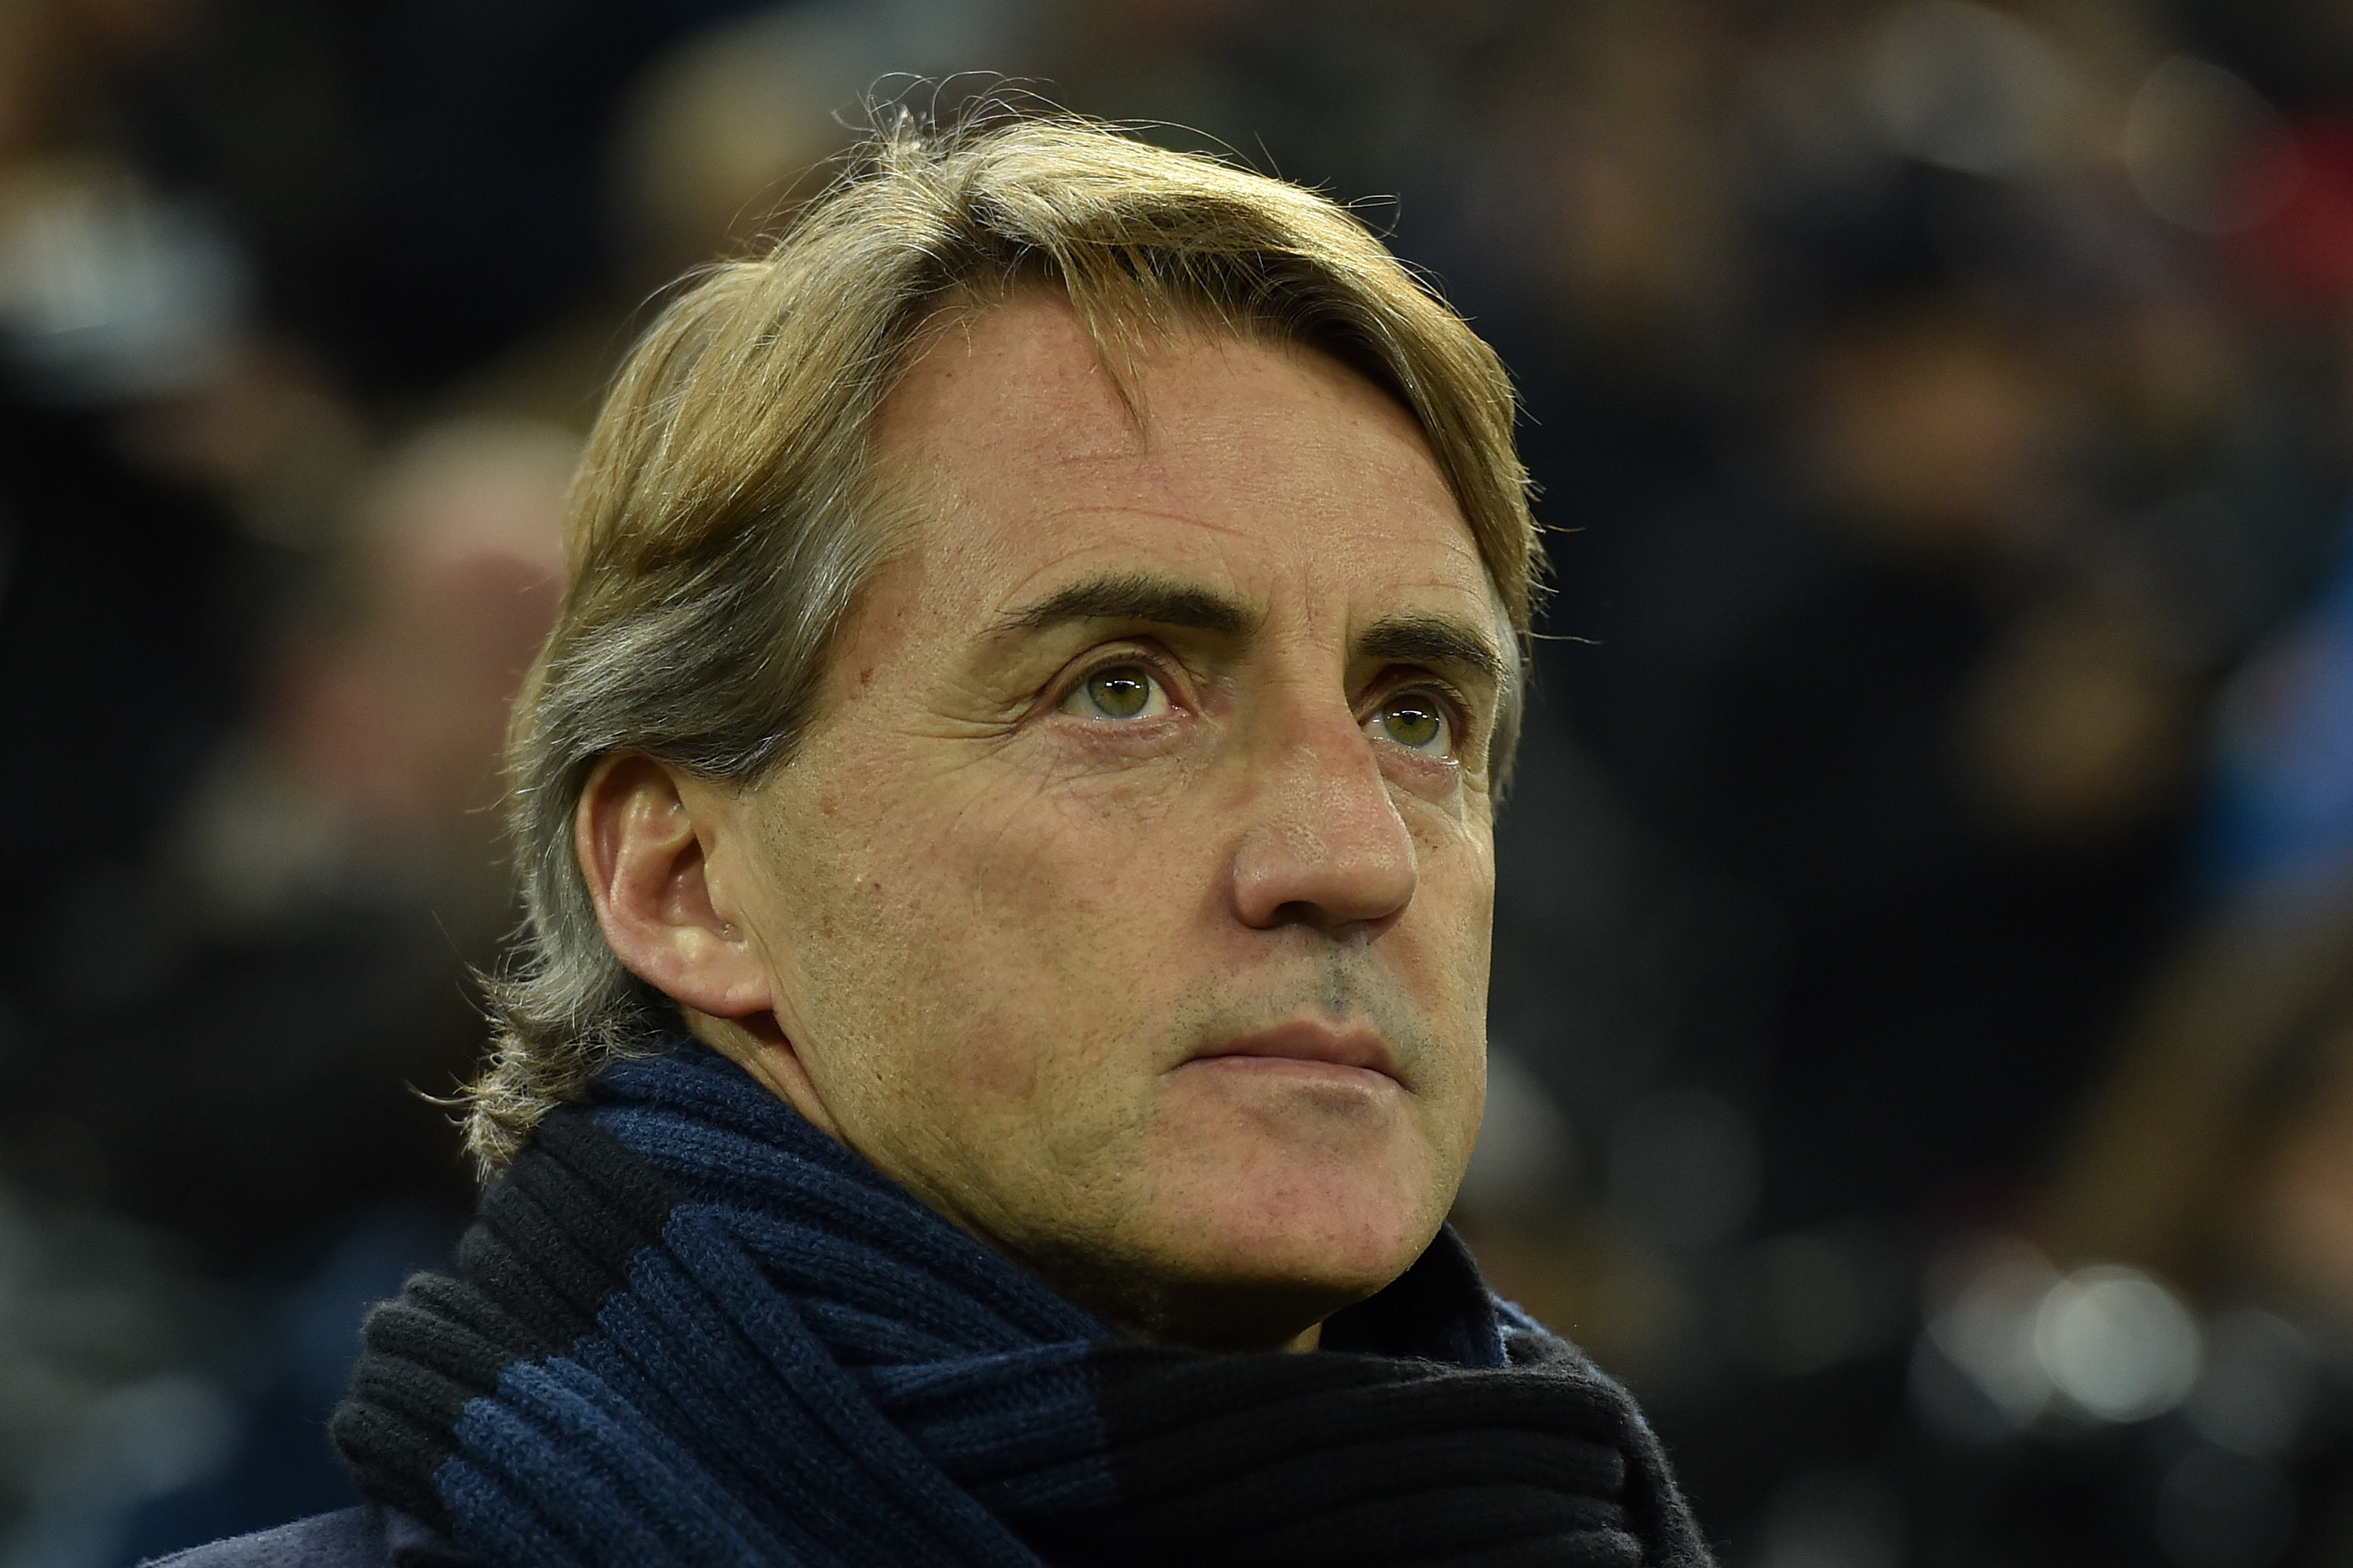 Mancini to IC: We want someone who can play in Europe for us